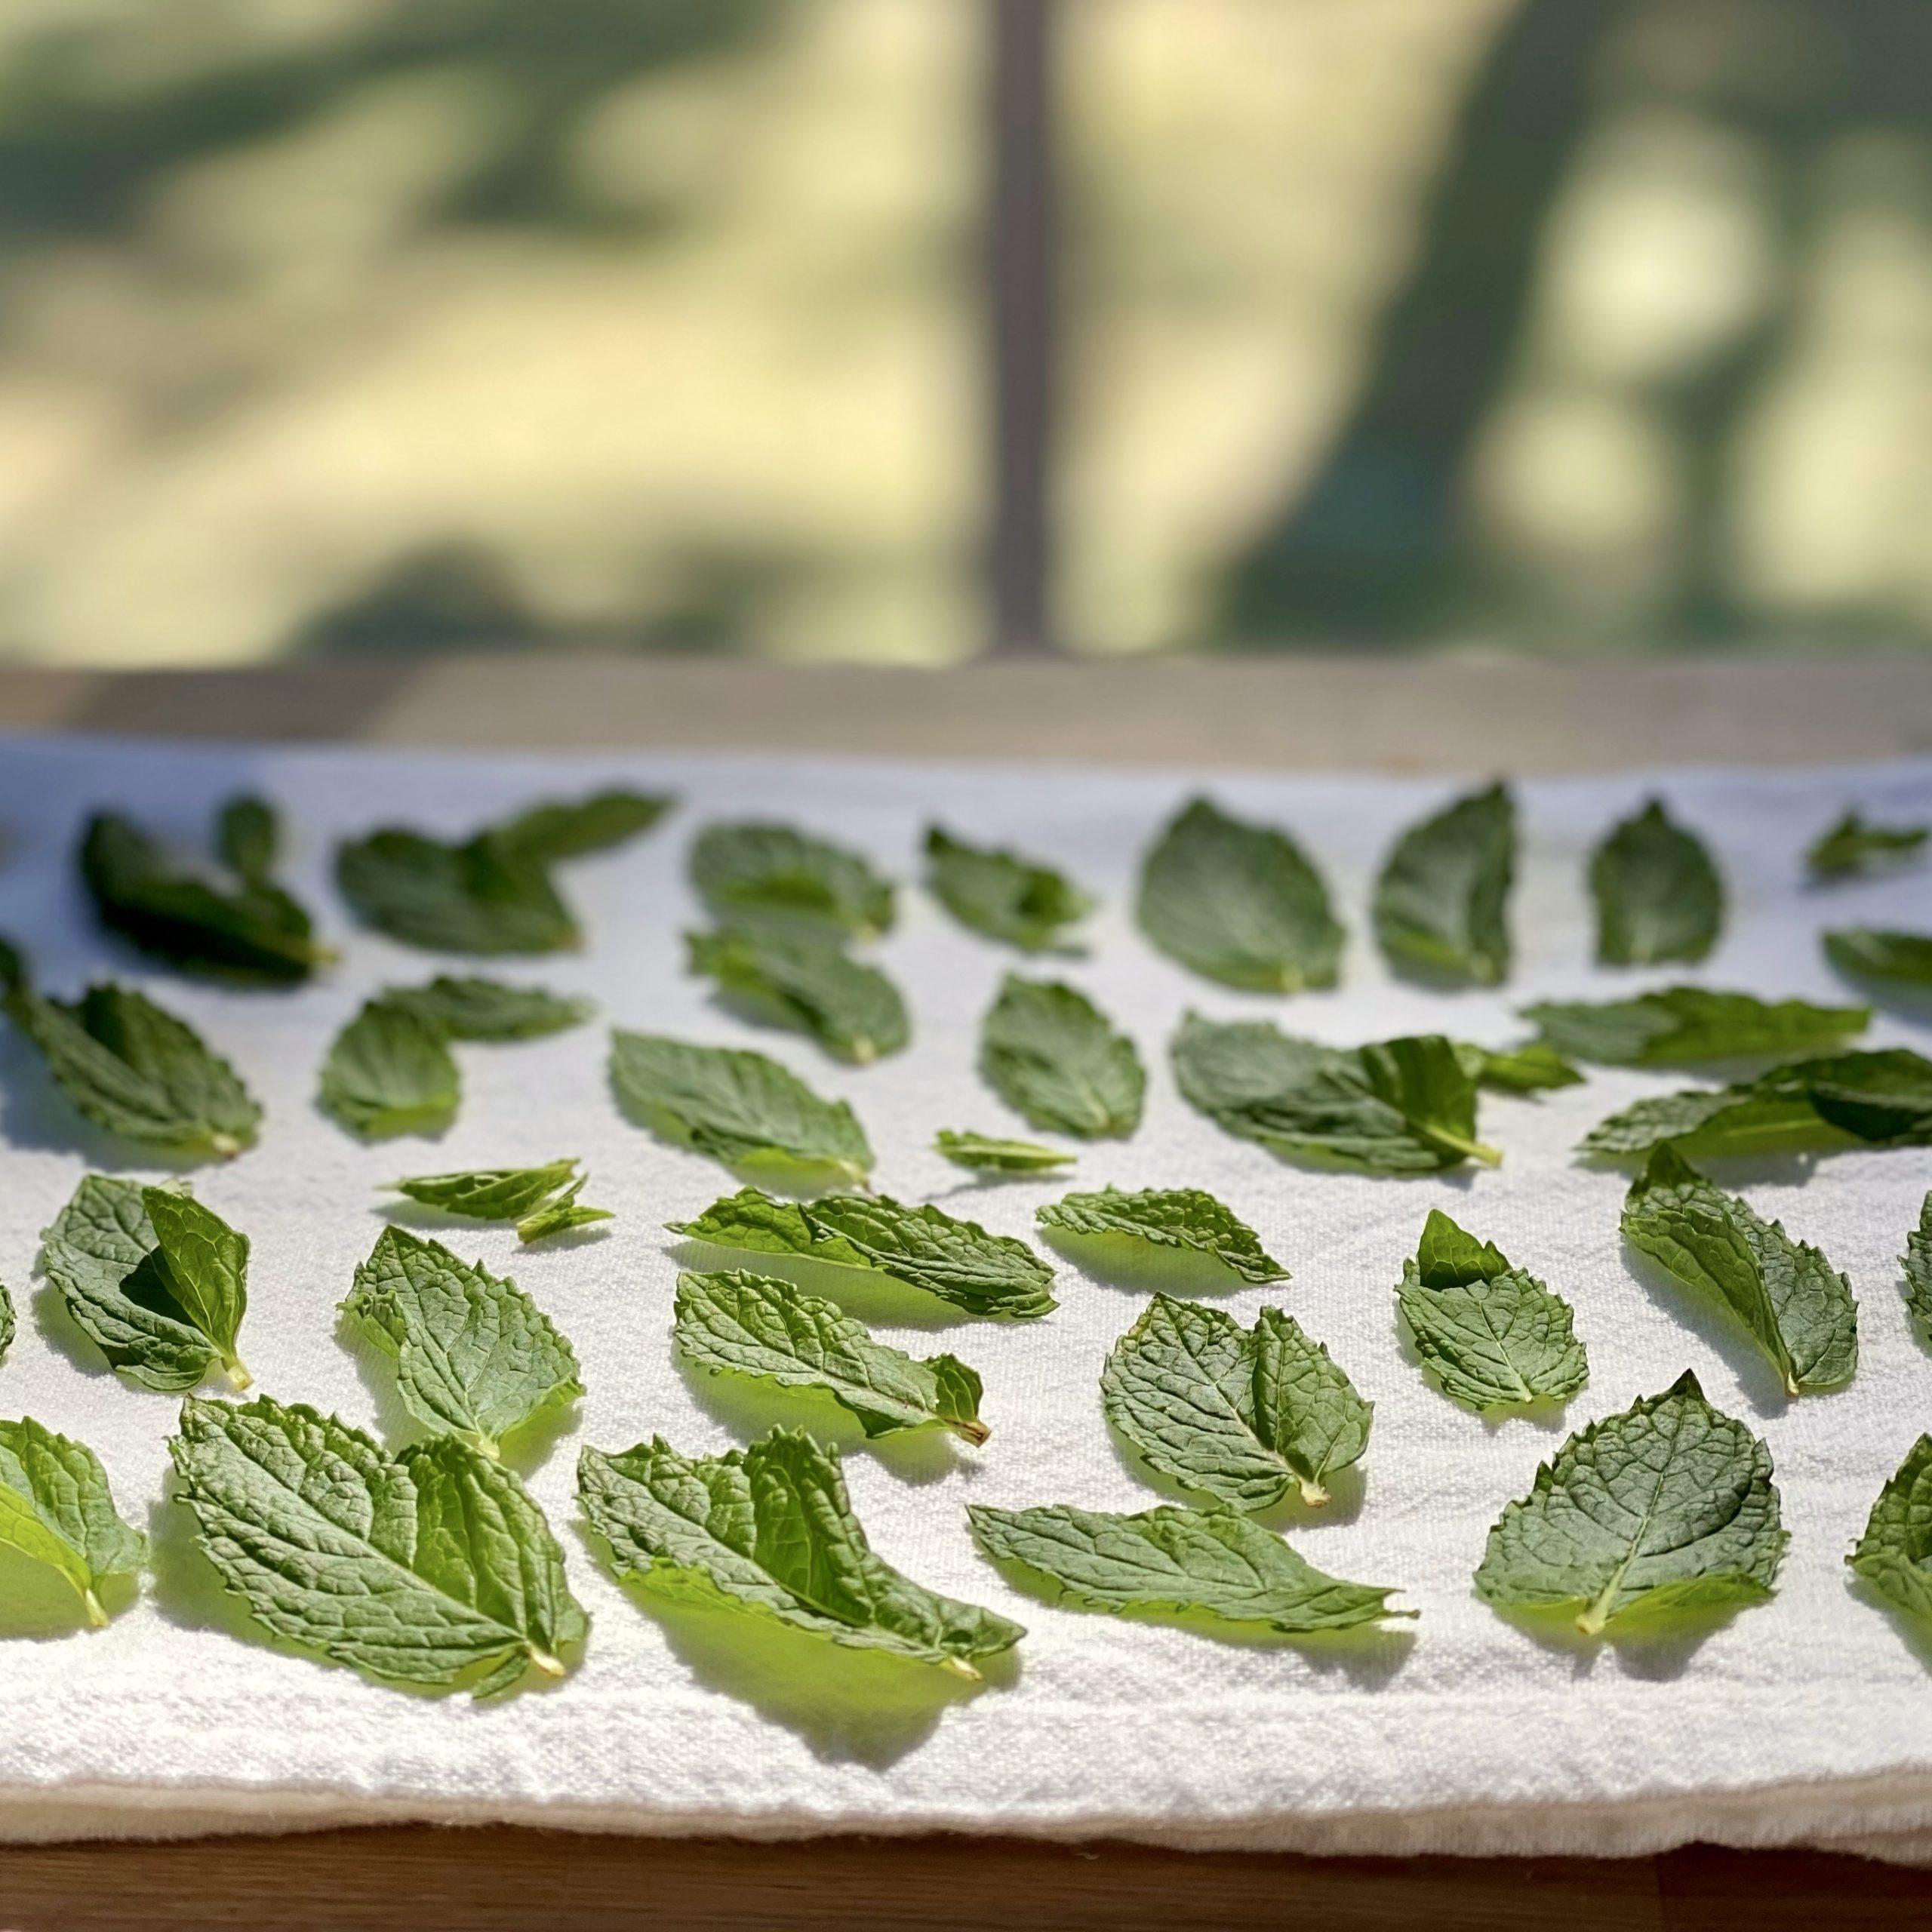 Peppermint leaves on a paper towel drying in front of a window.